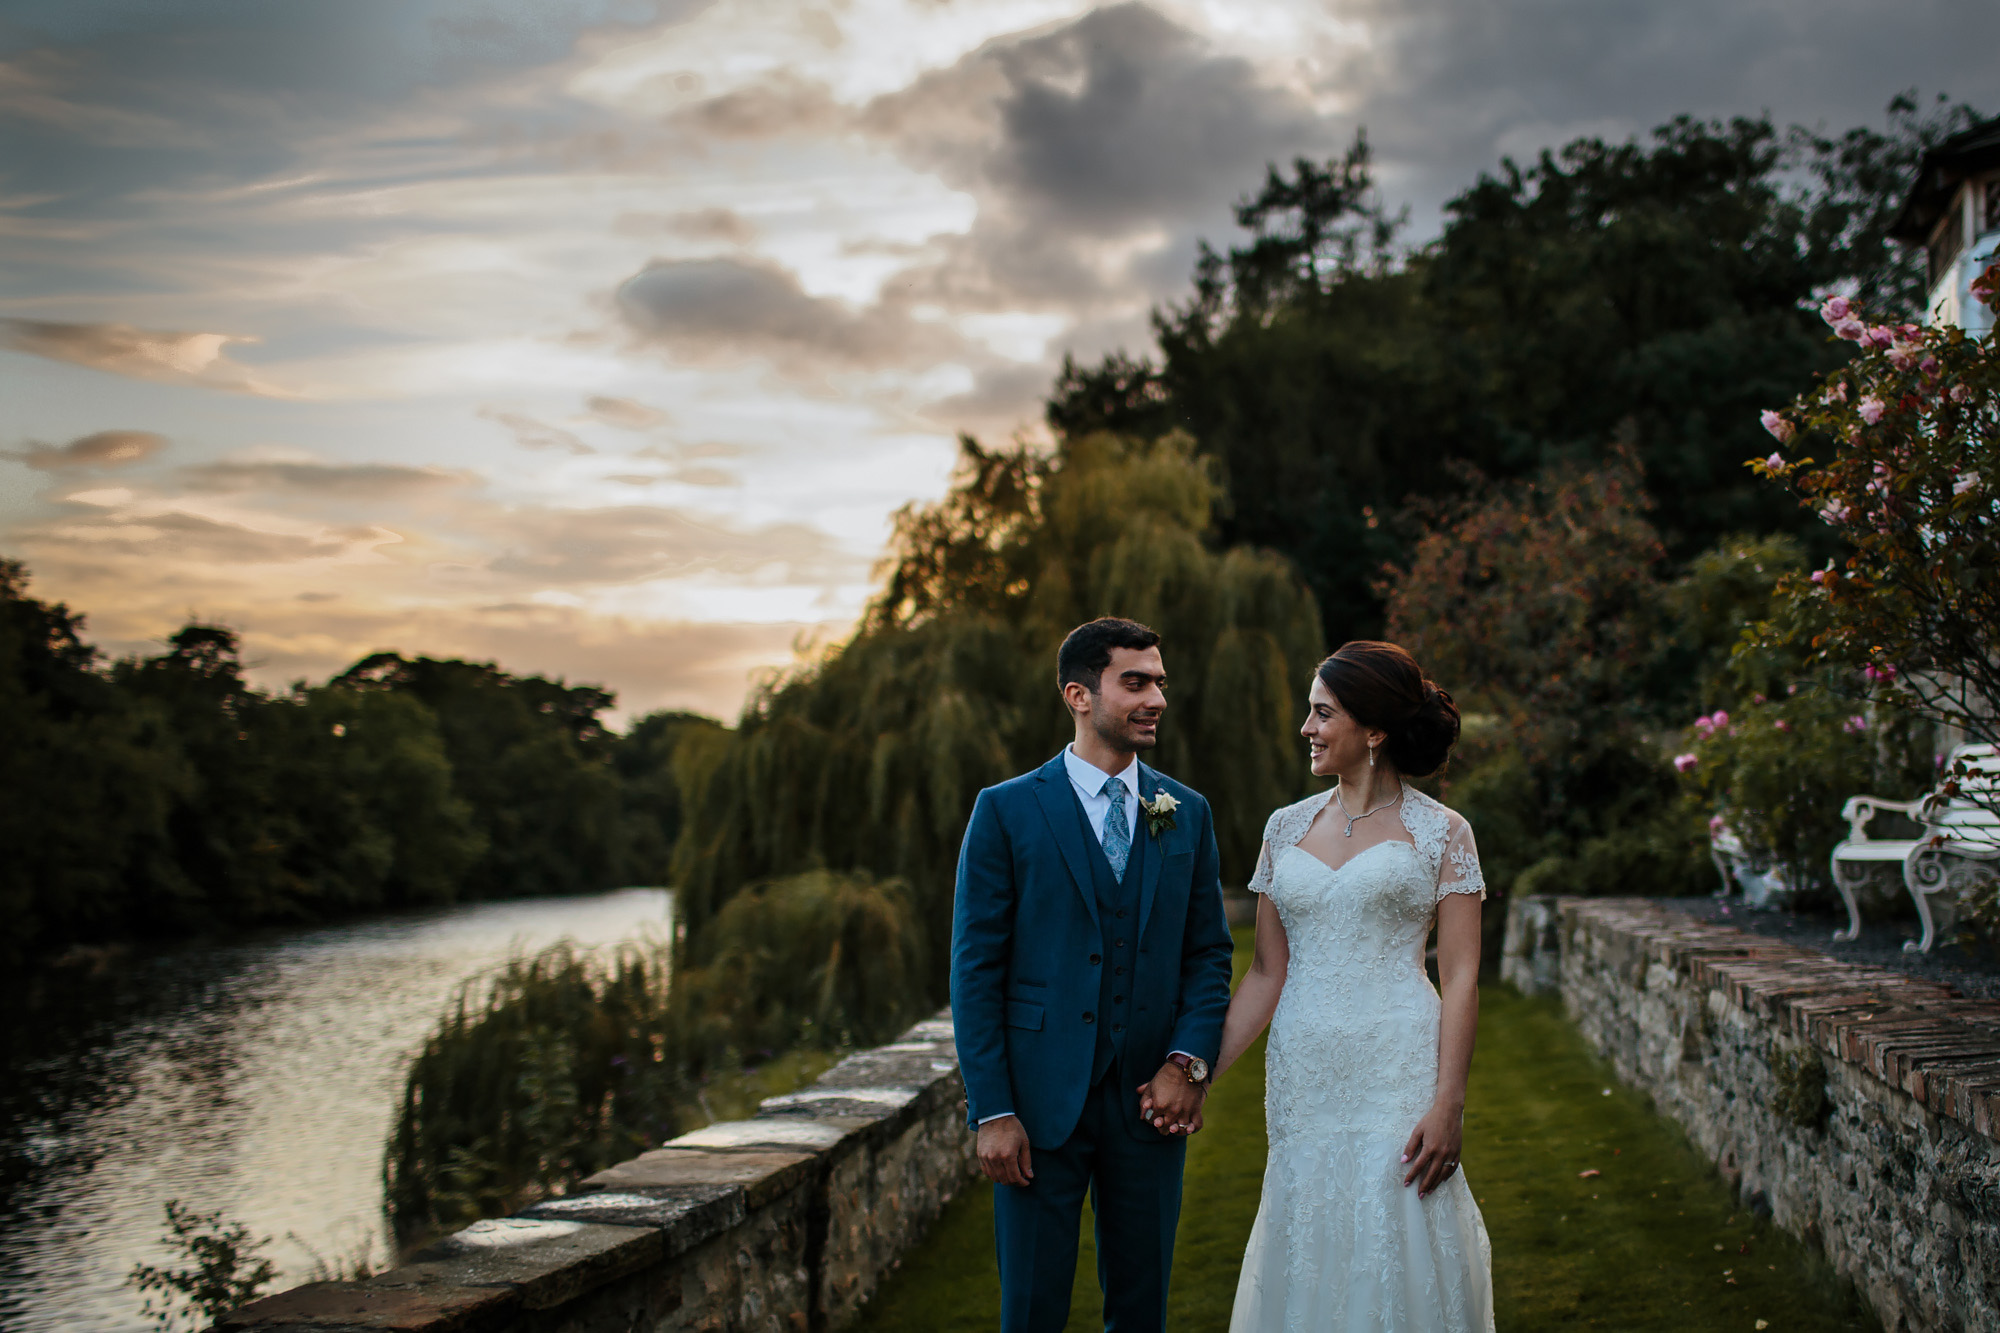 Portrait of the bride and groom at sunset by a river in Yorkshire